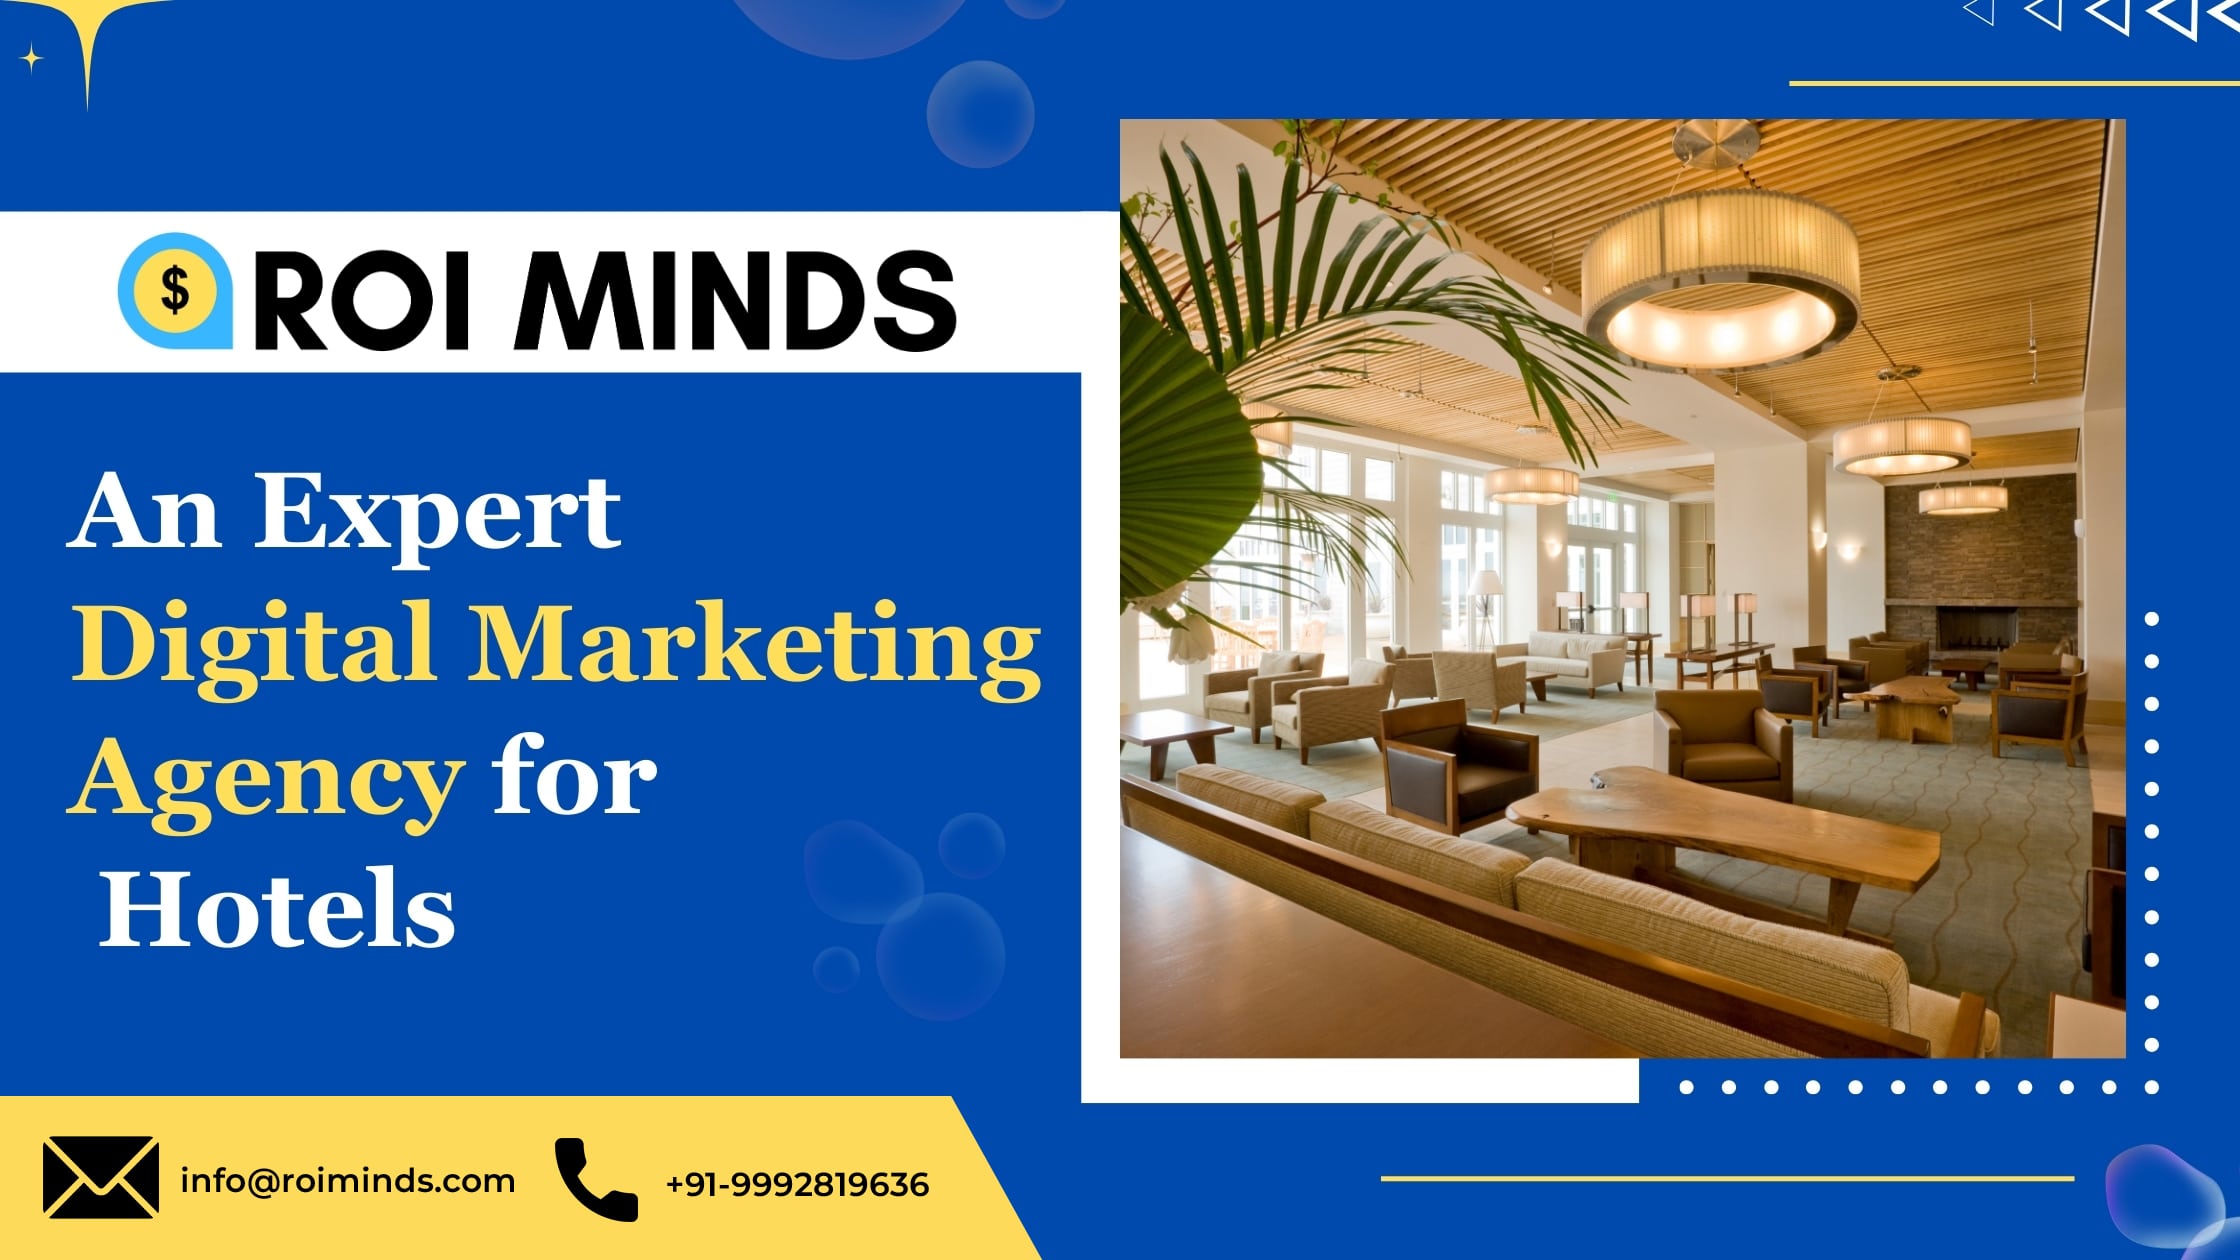 ROI MINDS An Expert Digital Marketing Agency for Hotels